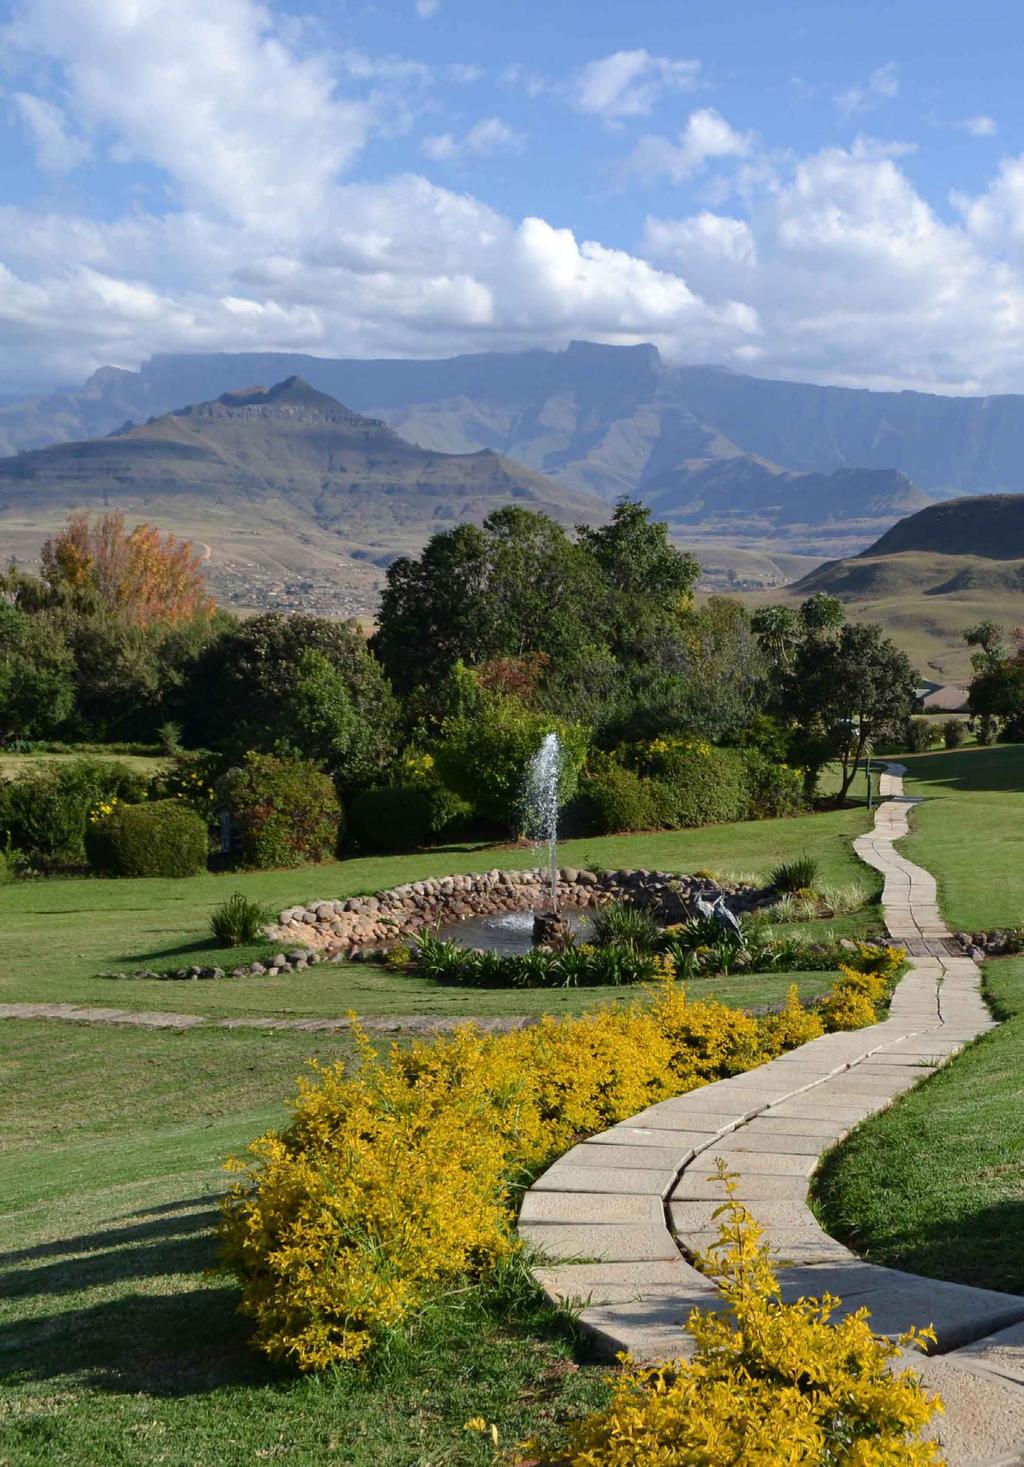 About The Property Nestled at the foothills of the majestic Drakensberg Mountains, this landmark property is easily accessible from Johannesburg and Durban.